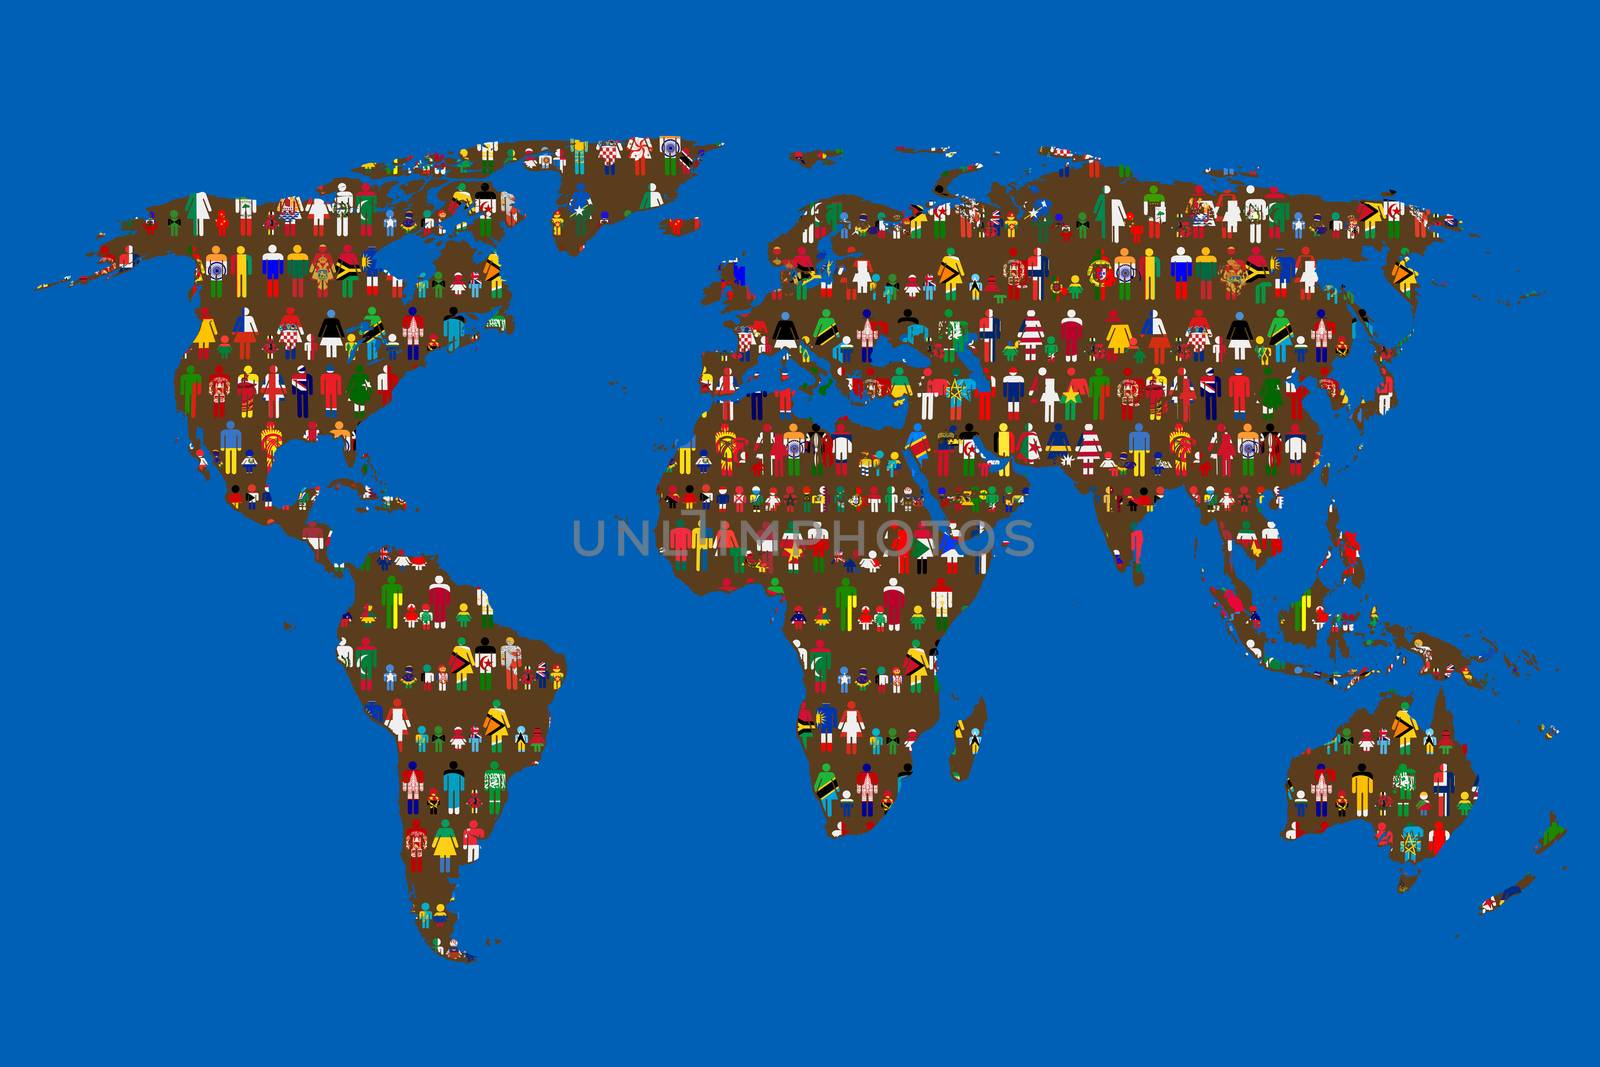 Globalizing concept of World map with people made from flags by hibrida13